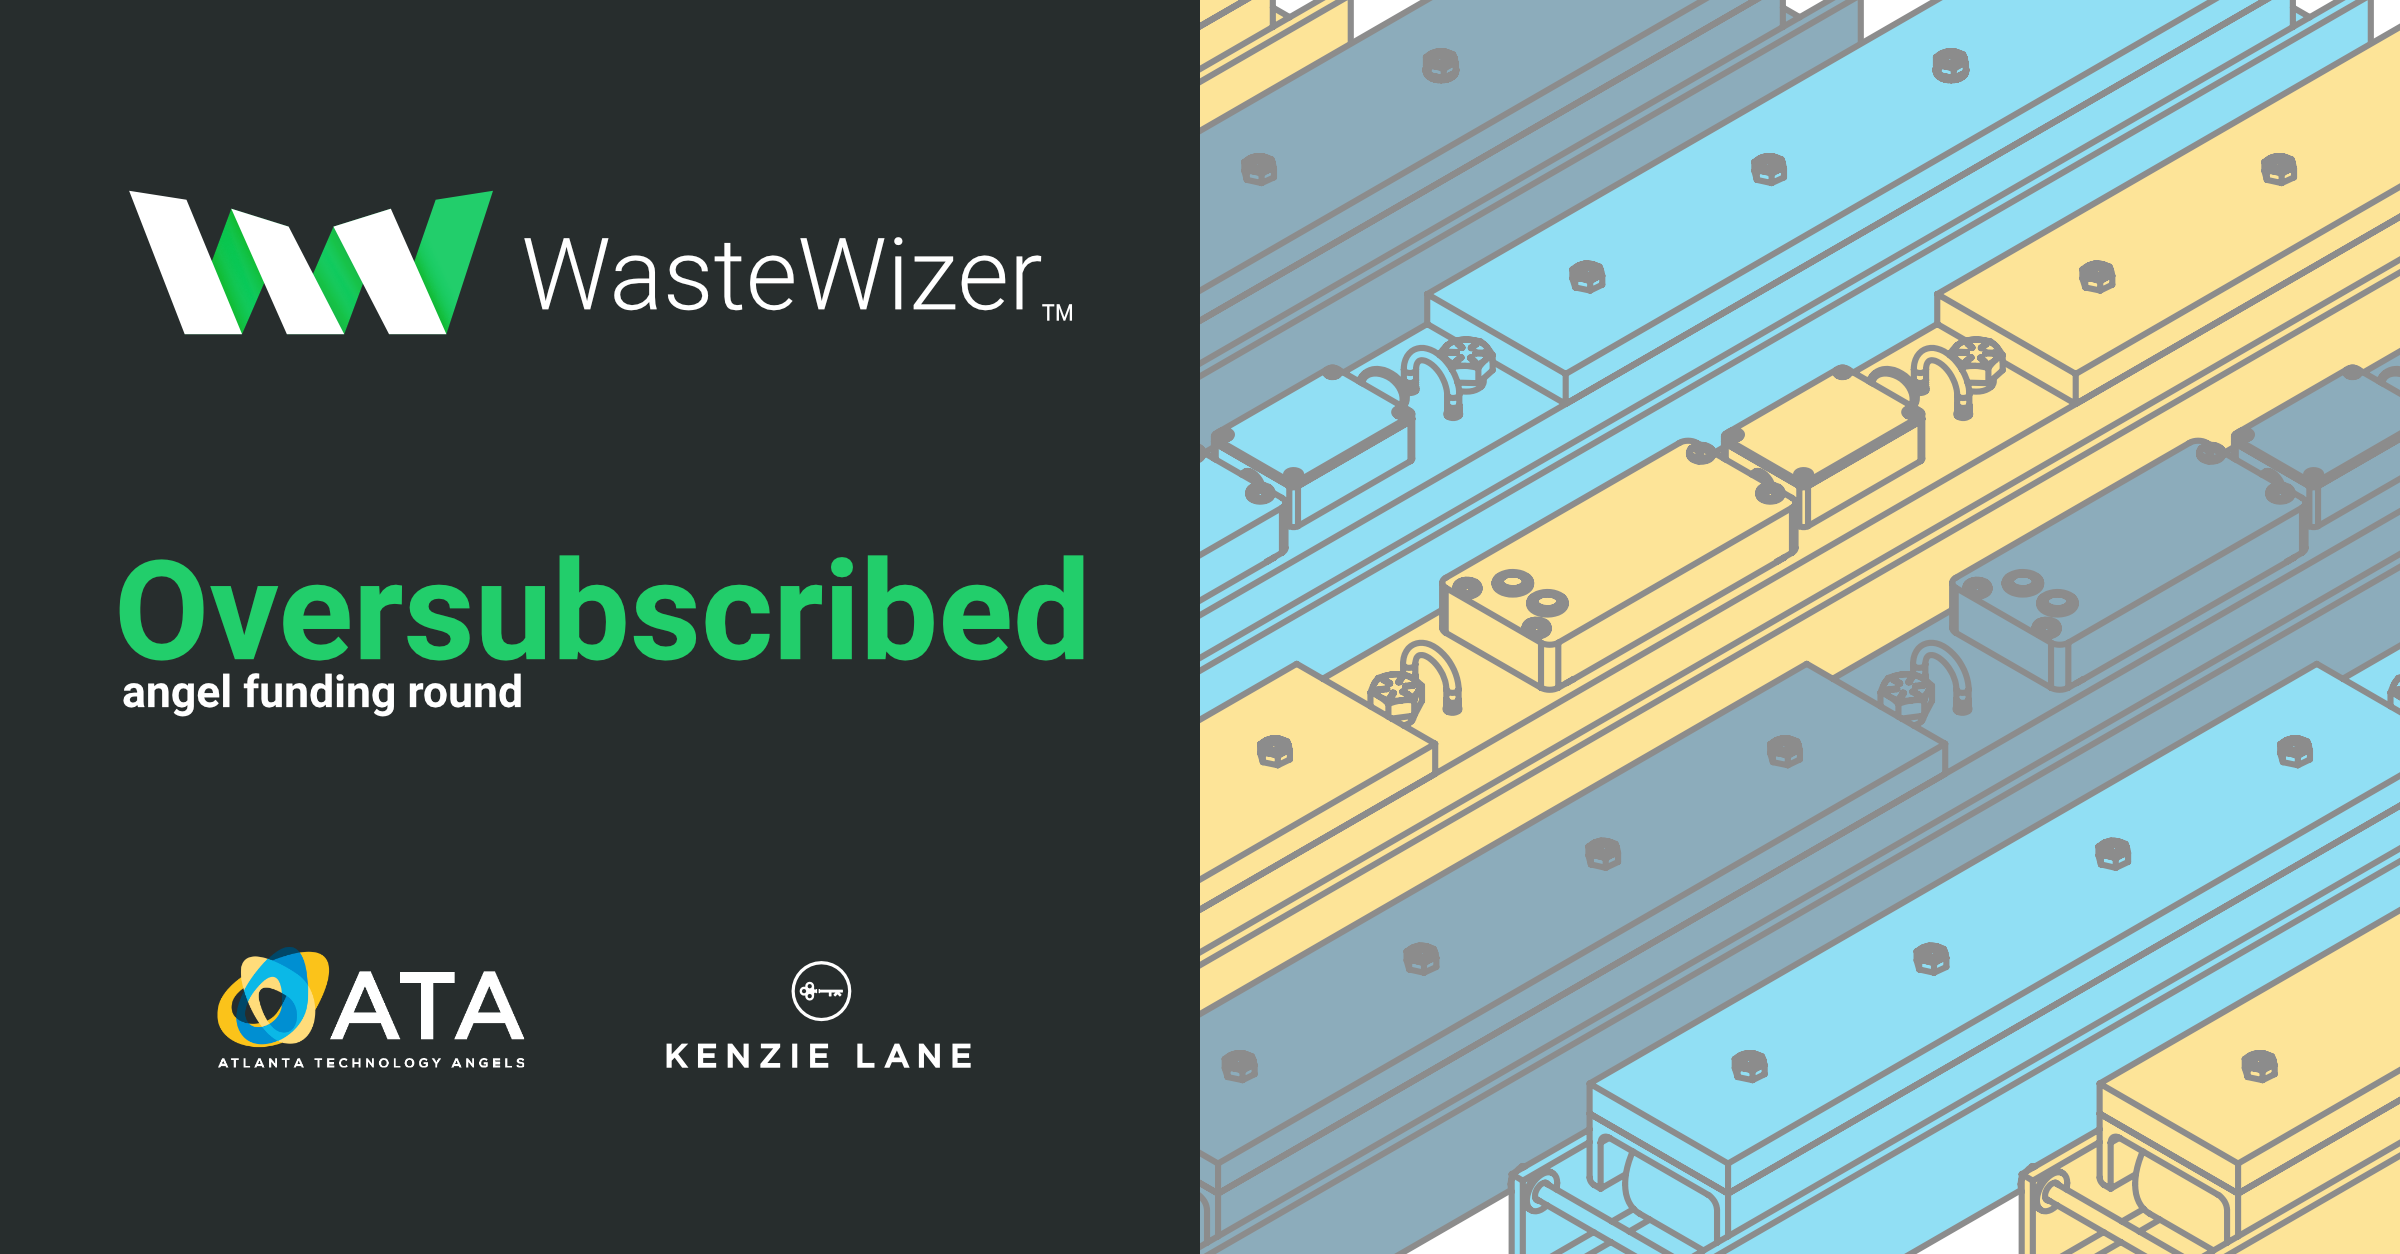 Announcing WasteWizer's Angel Funding